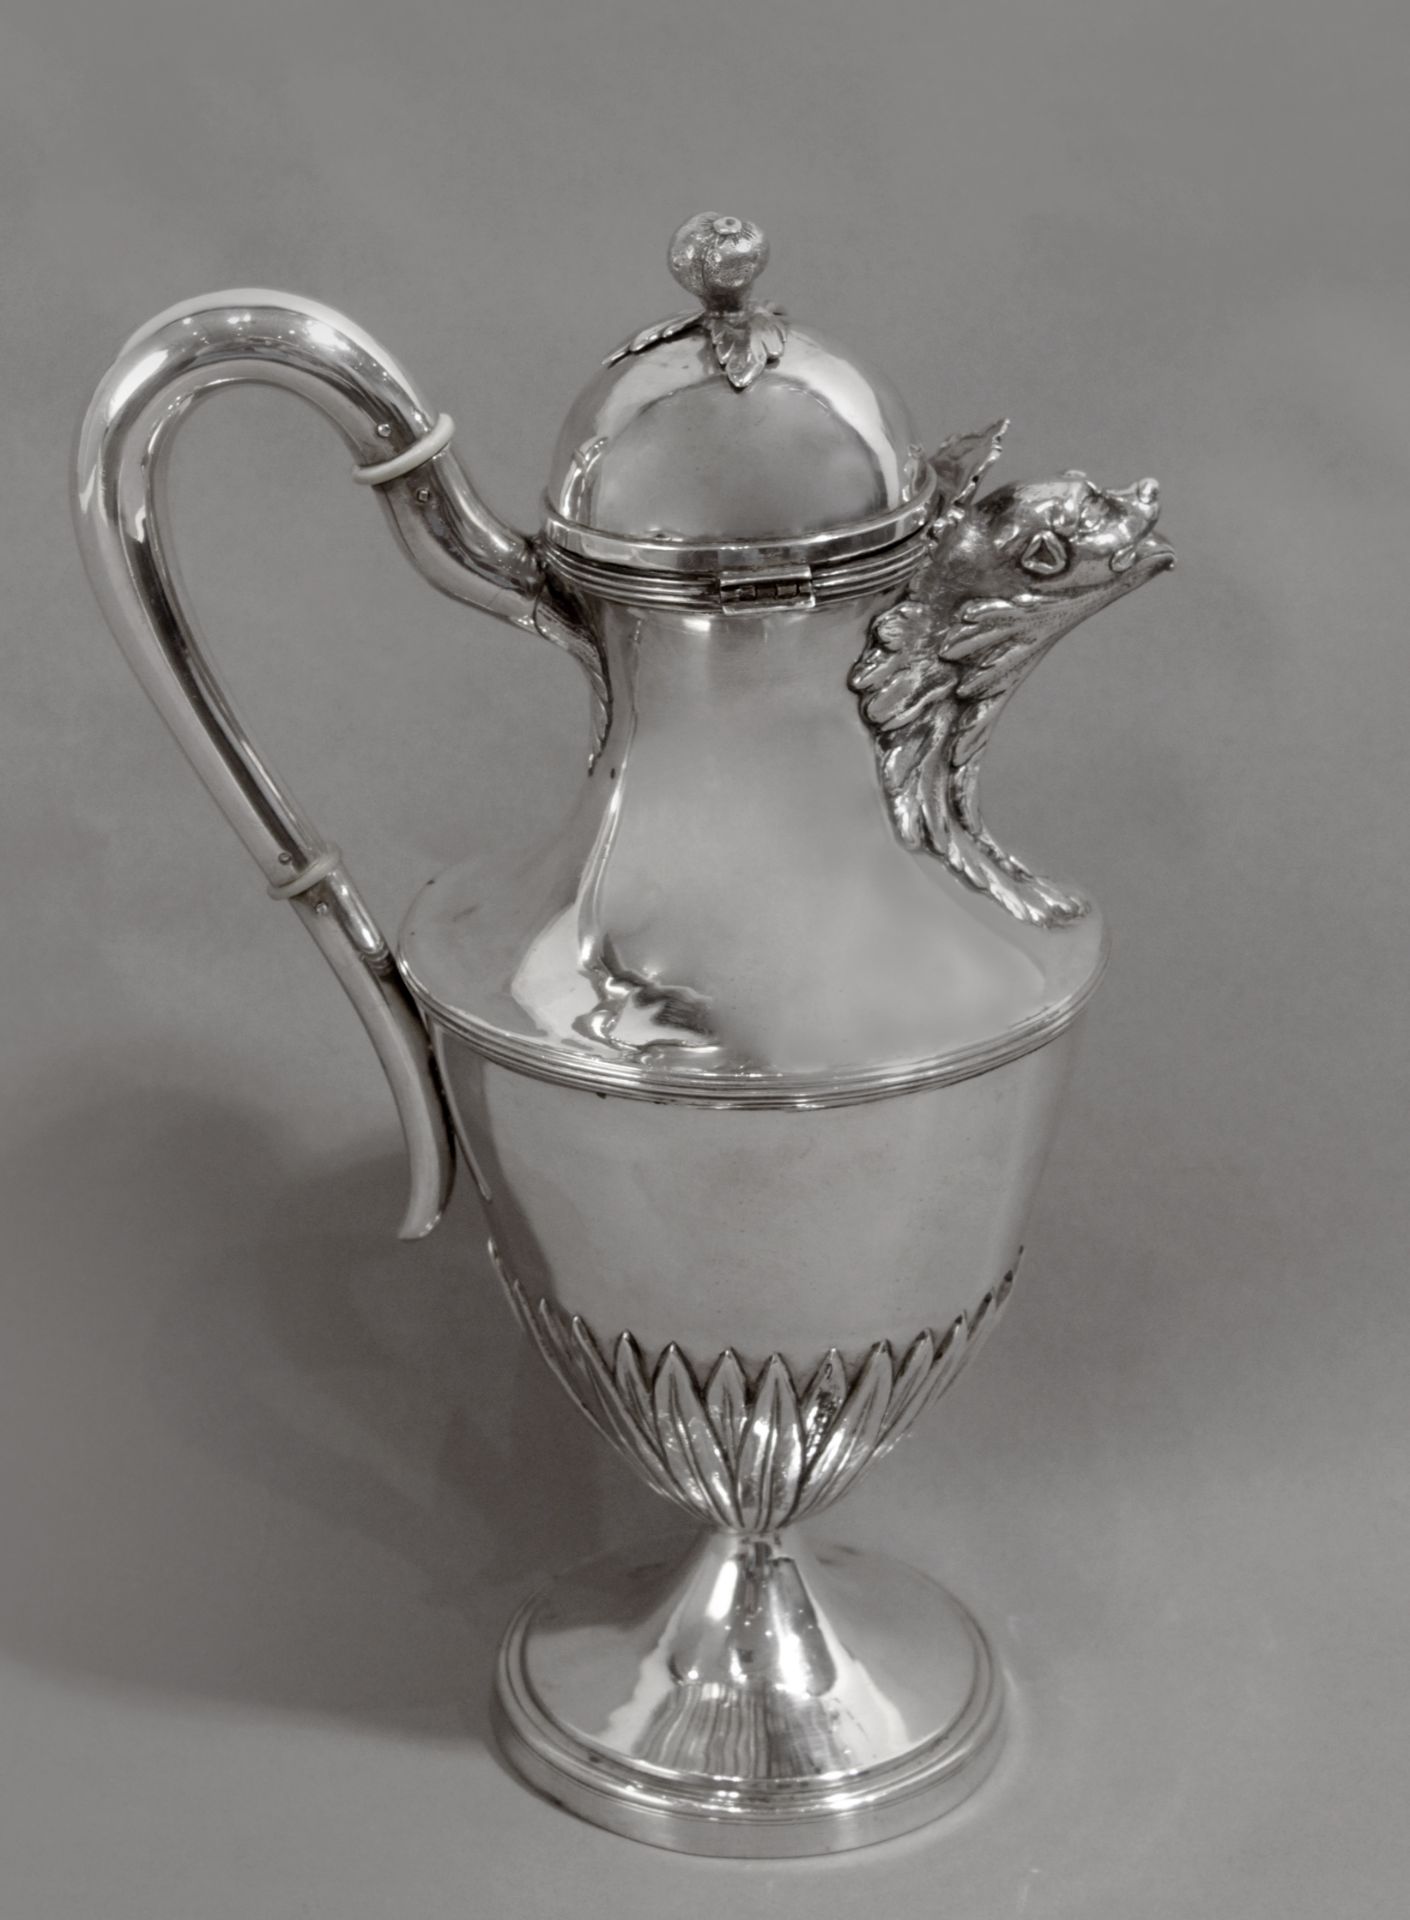 An 18th century silver jug with hallamarks from Barcelona - Image 2 of 3